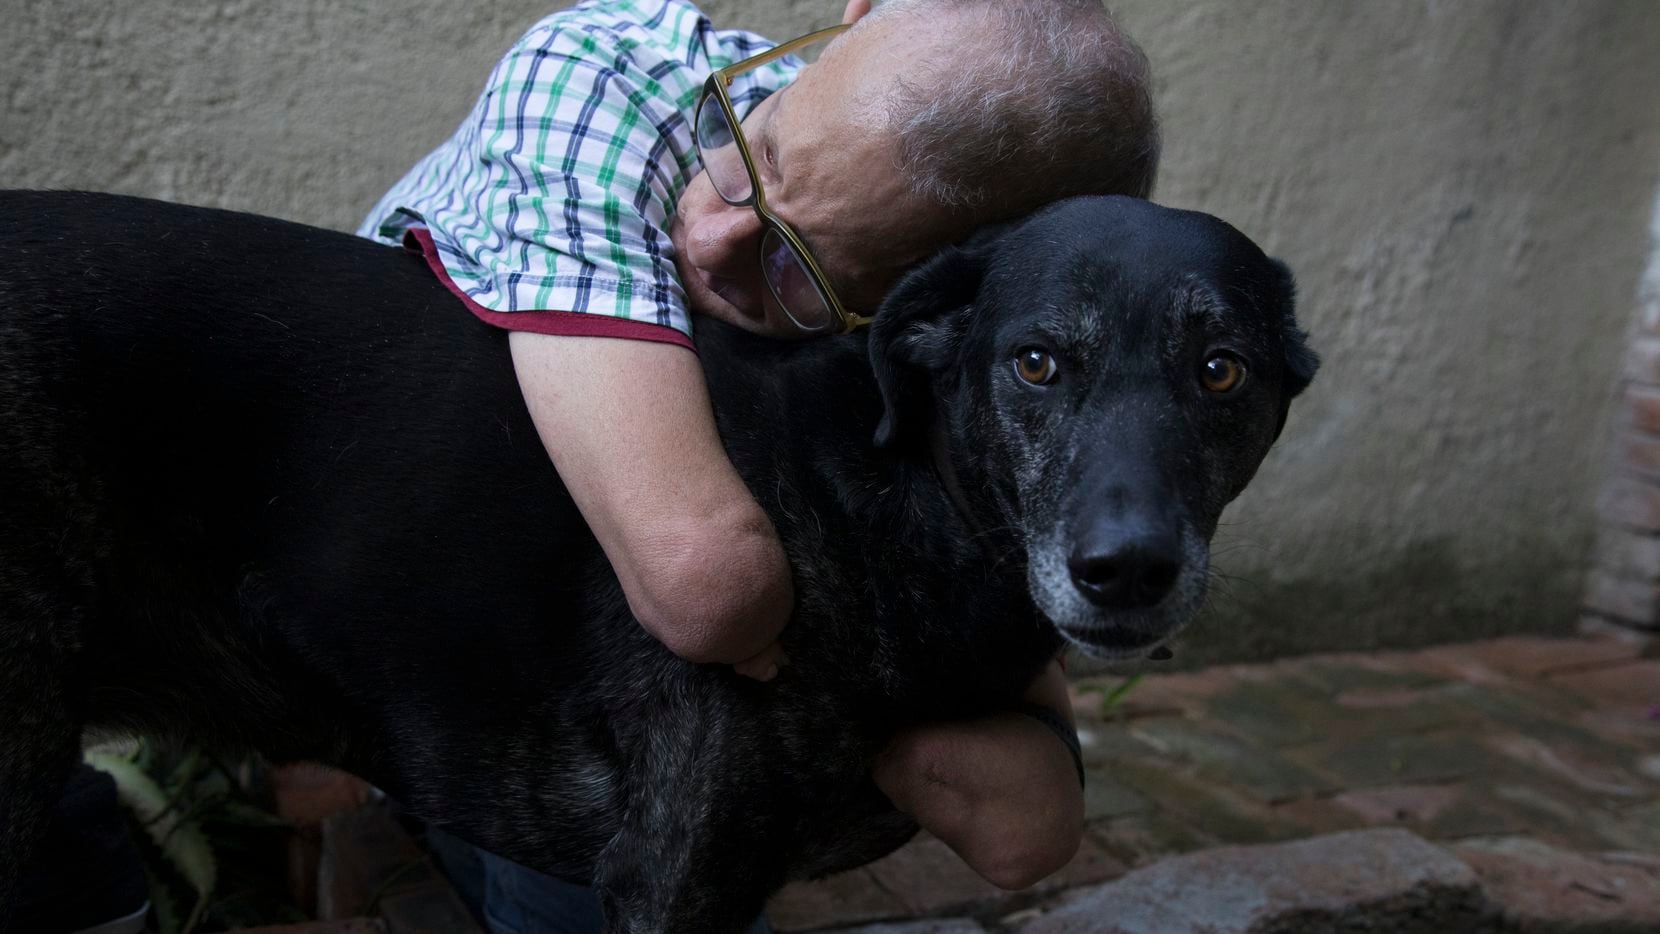 Charles Hall, 62, is pictured with Suerte (Luck), one of his rescue dogs, inside his home in...